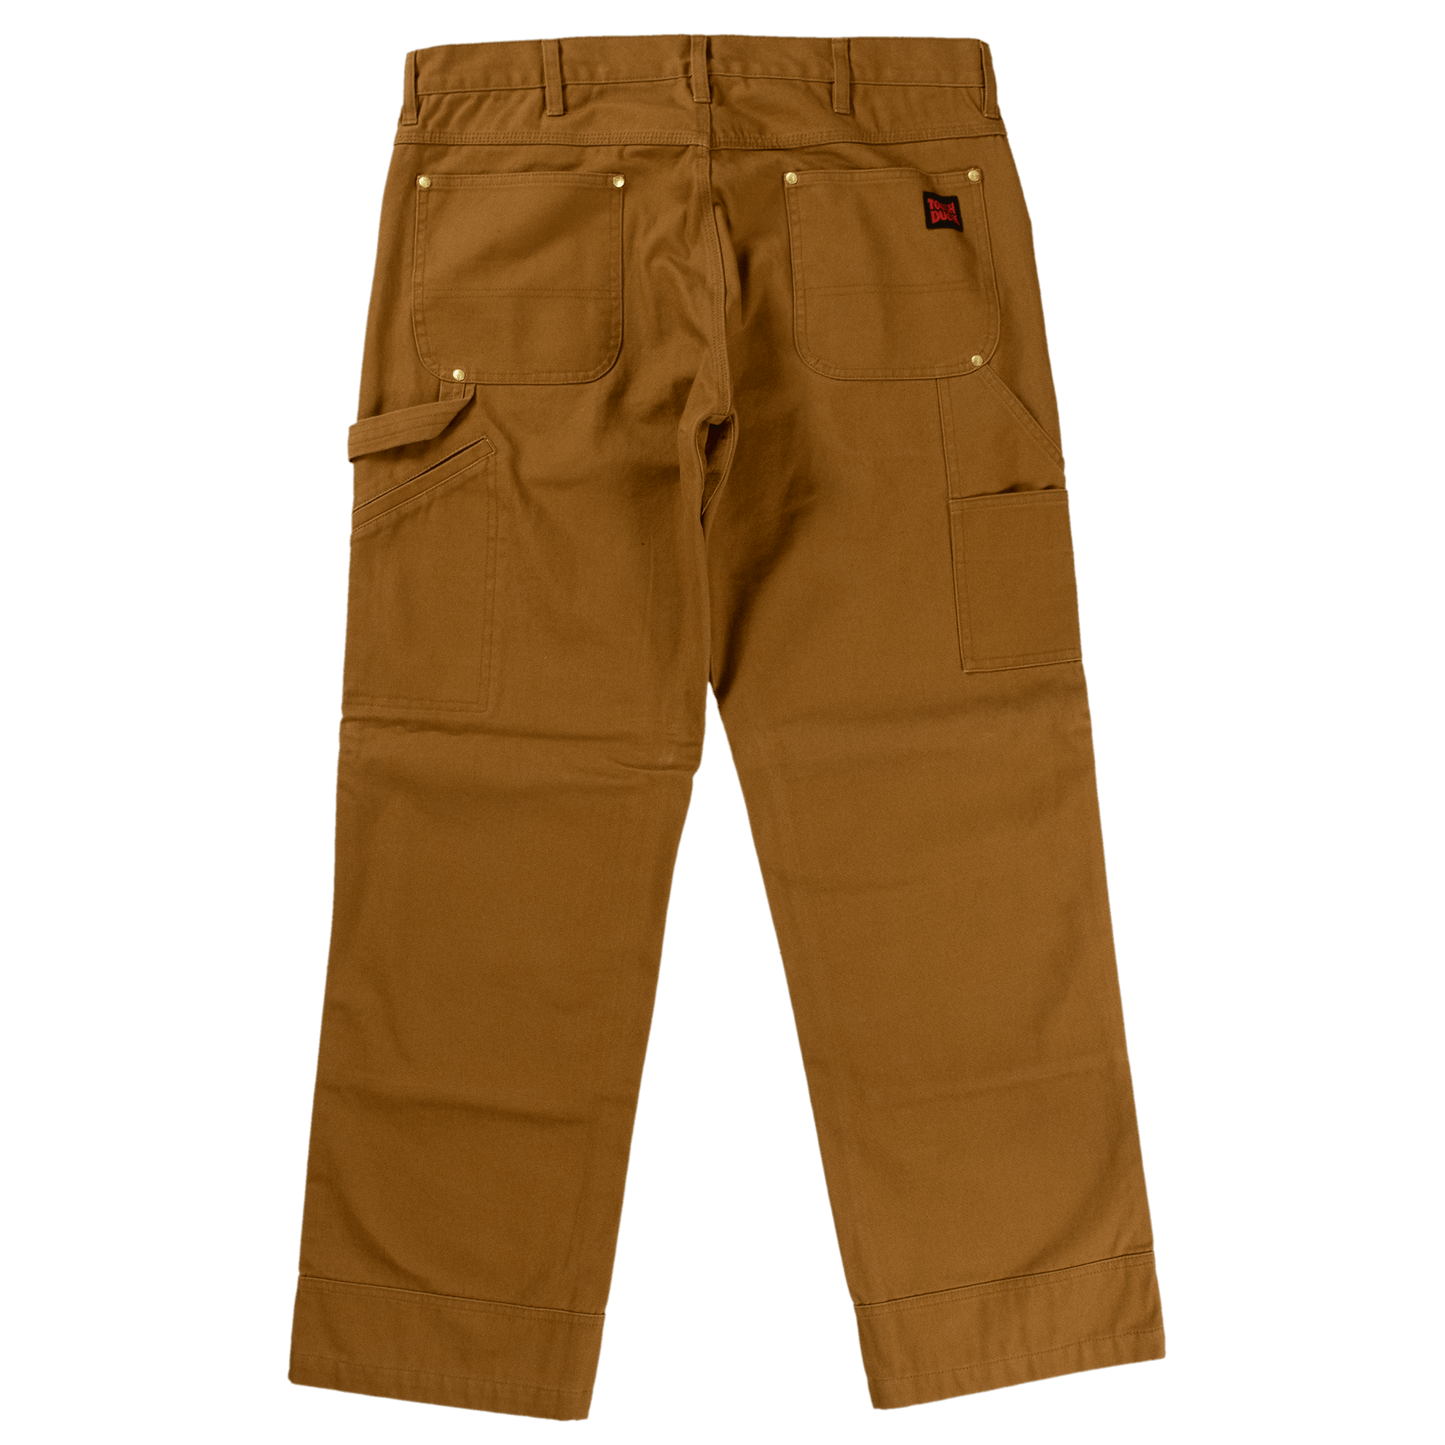 Tough Duck Washed Duck Pants - WP02 - Brown - back